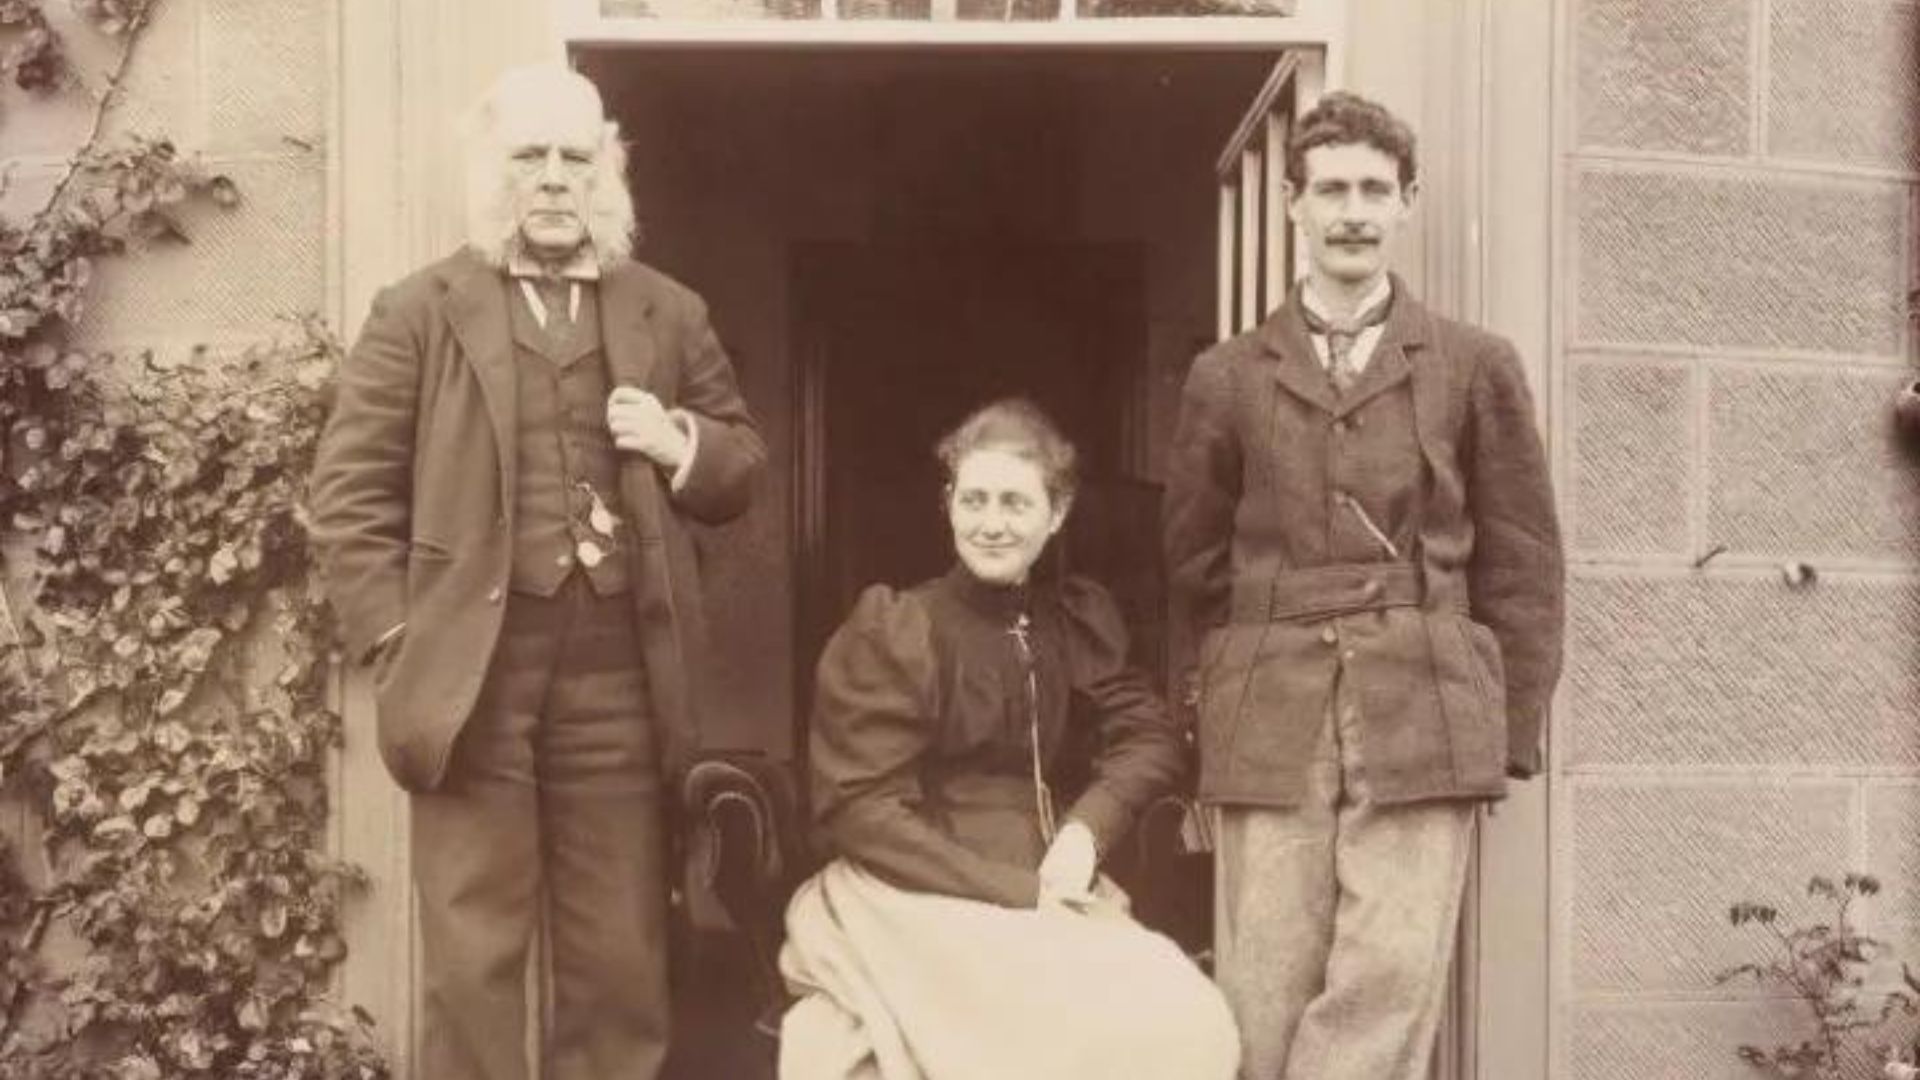 Beatrix Potter with her father Rupert (left) and brother Walter Bertram Potter (right) in 1894.